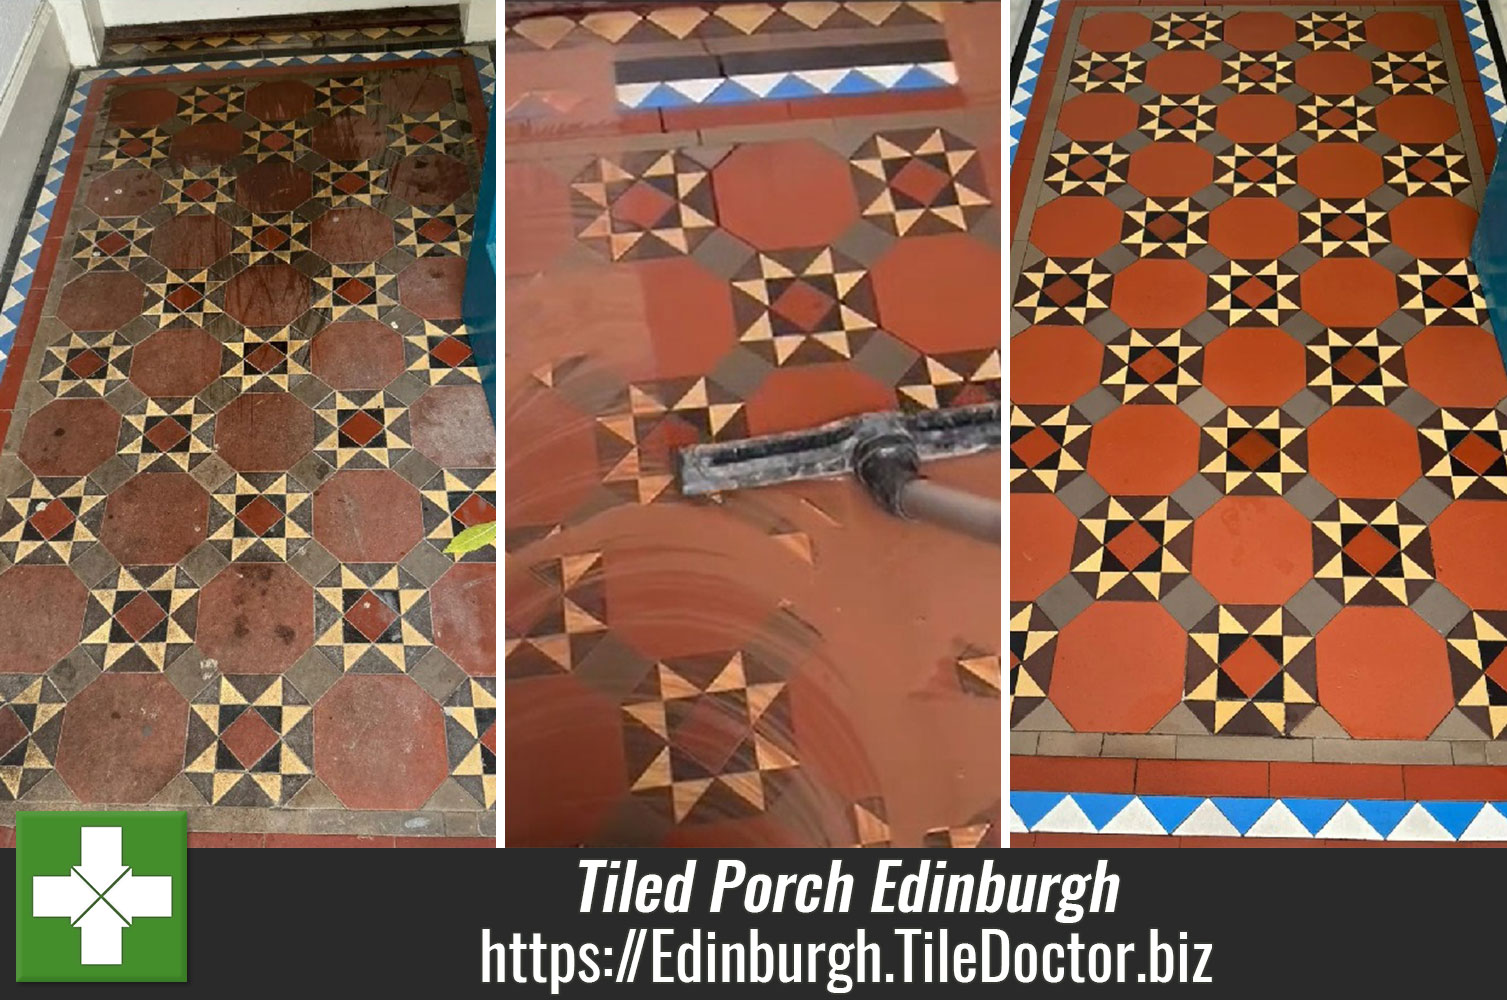 Using Externally Rated Tile Doctor X-Tra Seal to protect a Victorian Tiled Porch Floor in Edinburgh